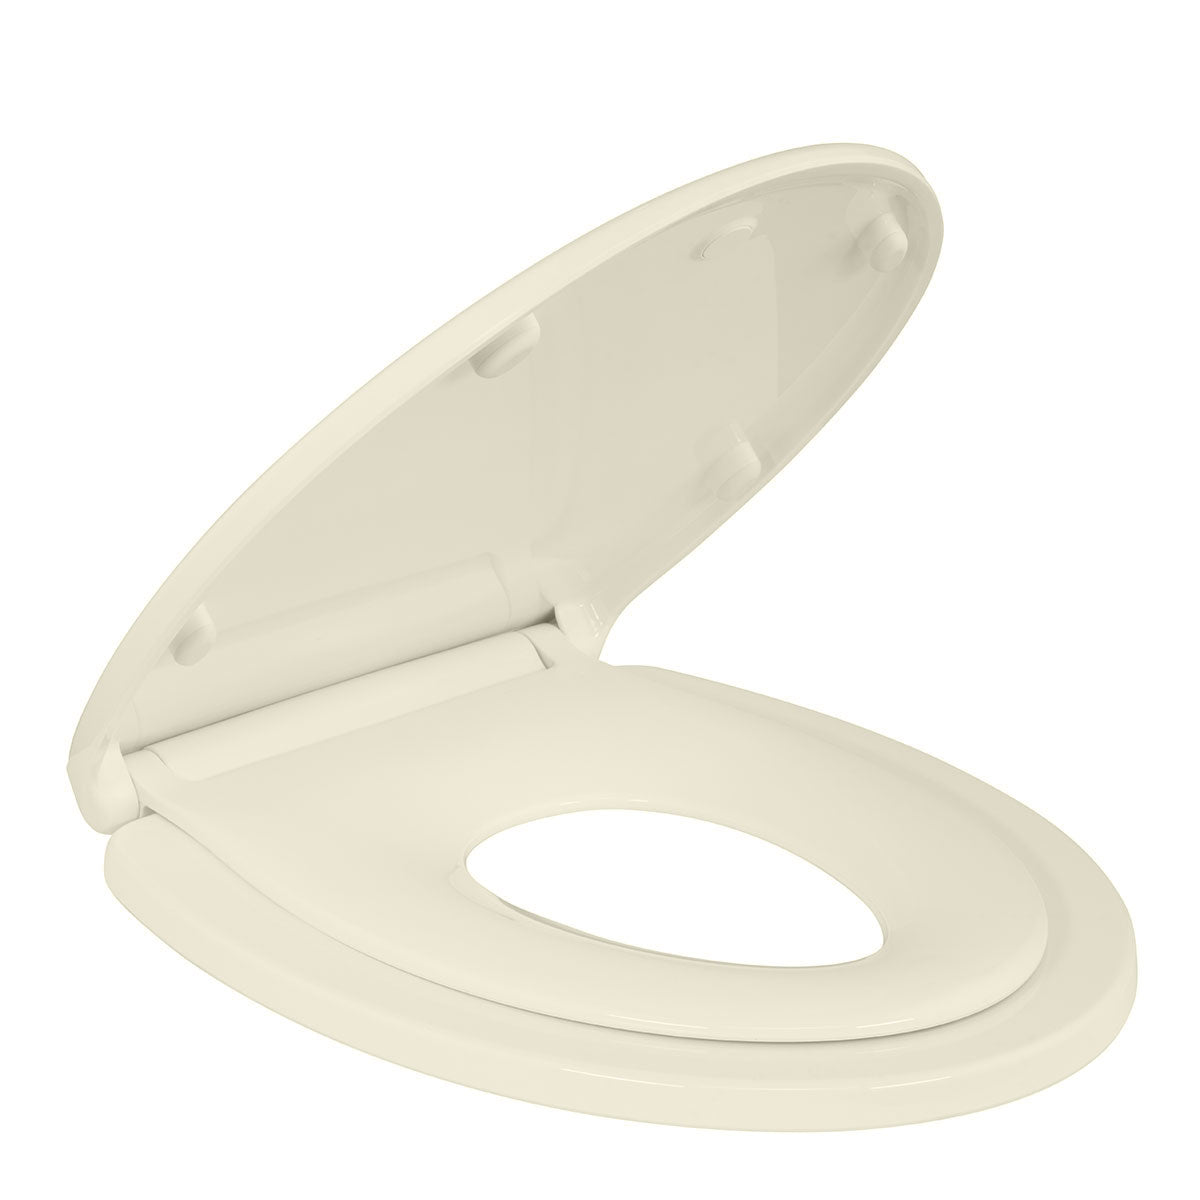 Almond/Bone Elongated Kingsport Family Toilet Seat with Built-In Child Seat